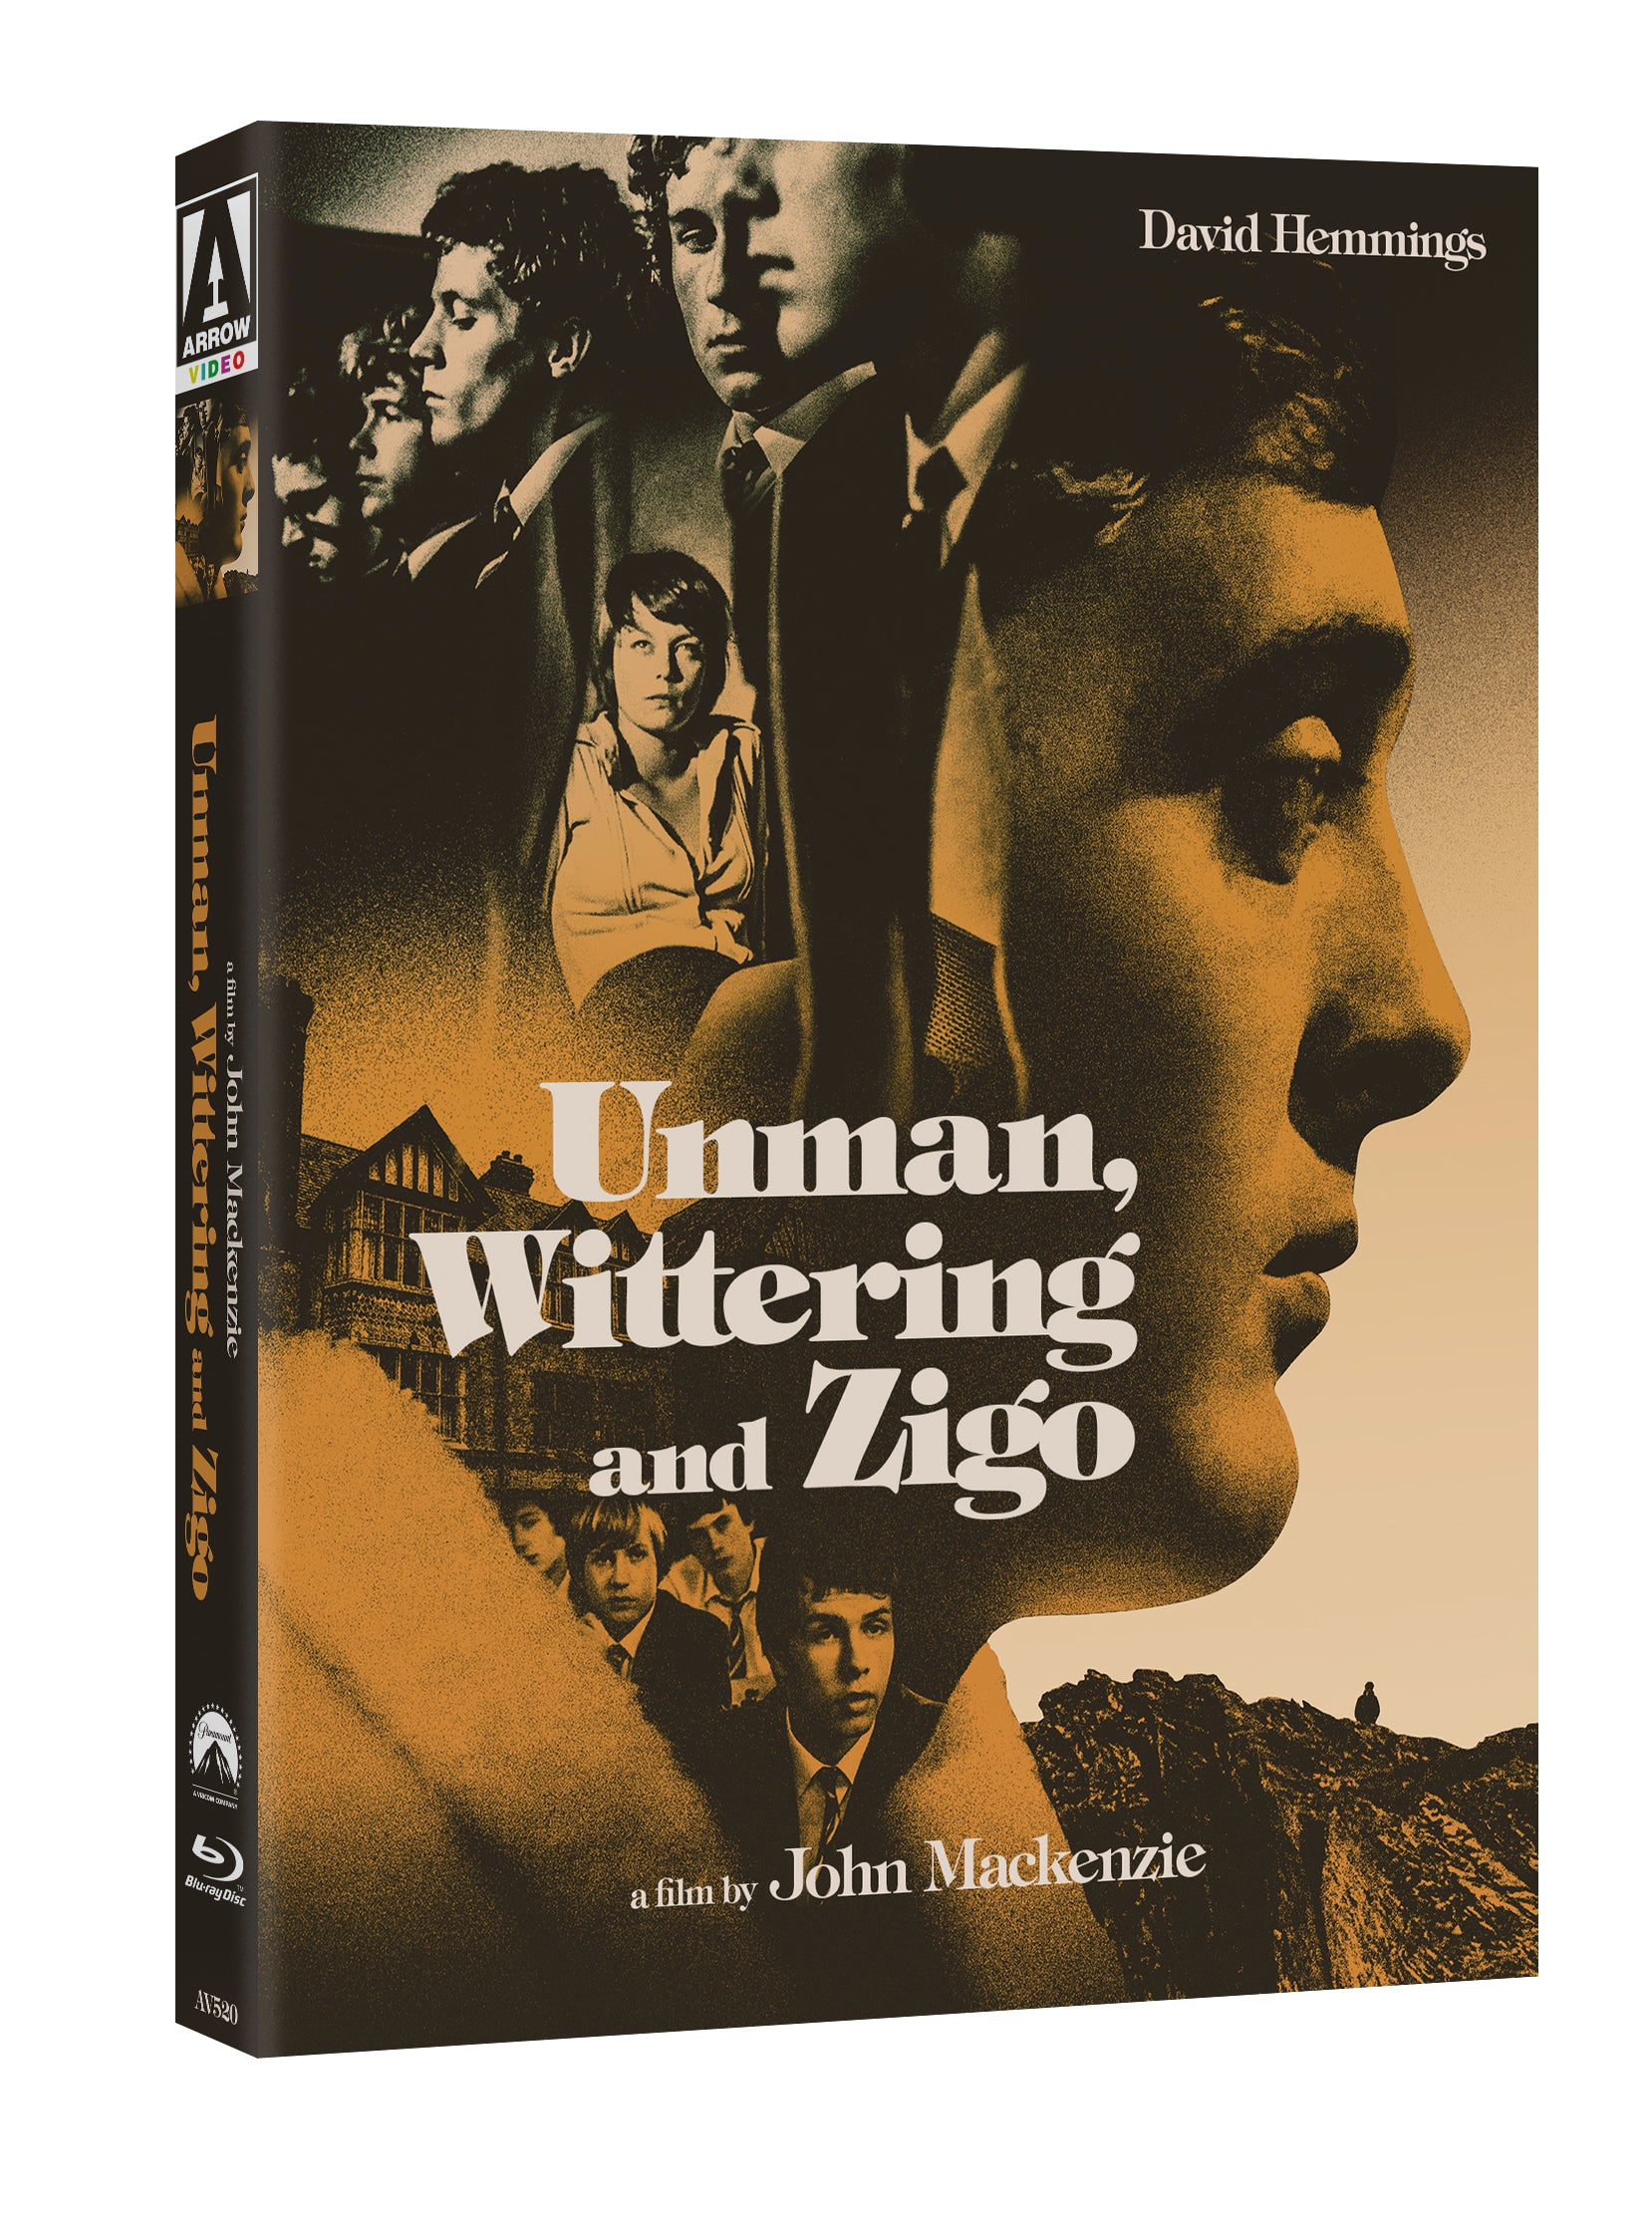 UNMAN WITTERING AND ZIGO (LIMITED EDITION) BLU-RAY